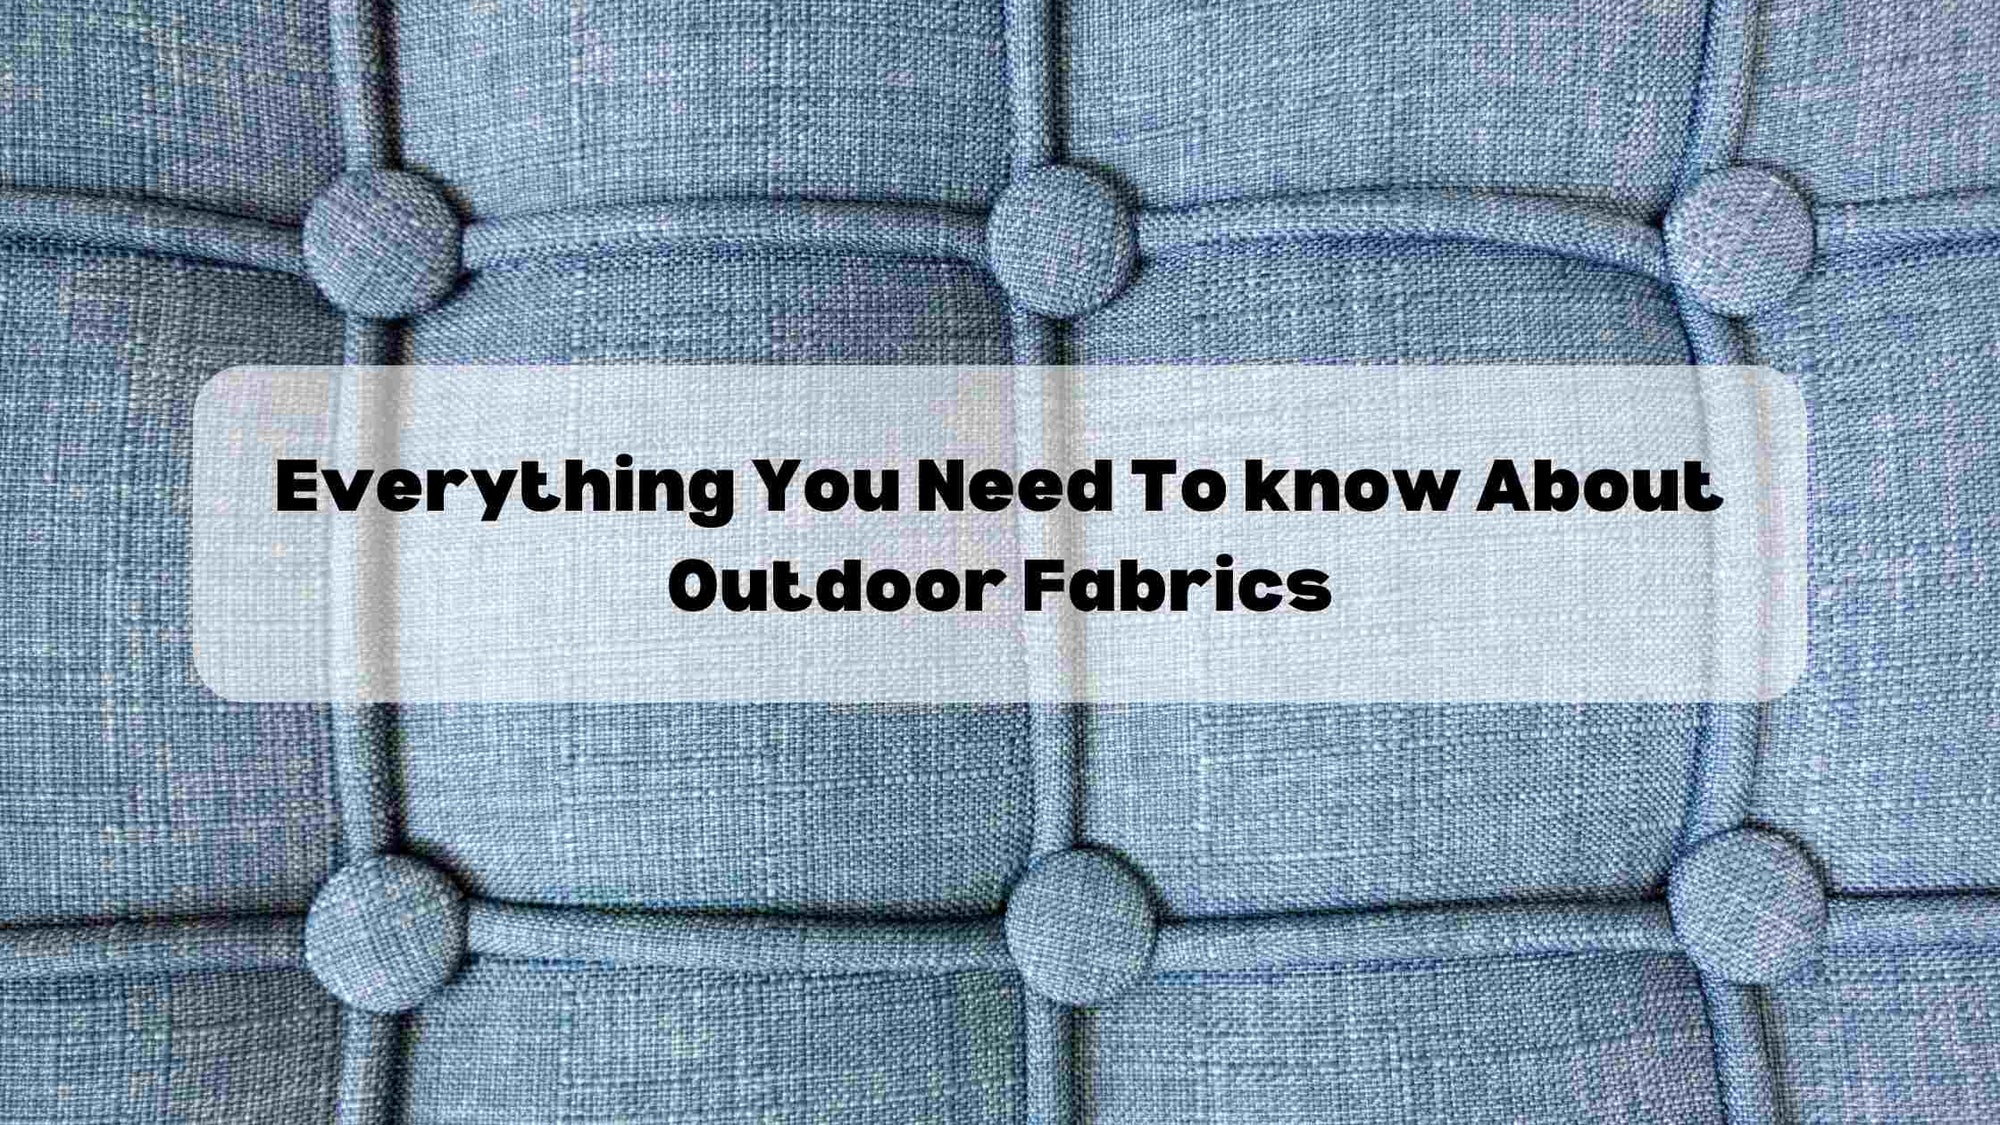 Everything You Need To Know About Outdoor Fabrics